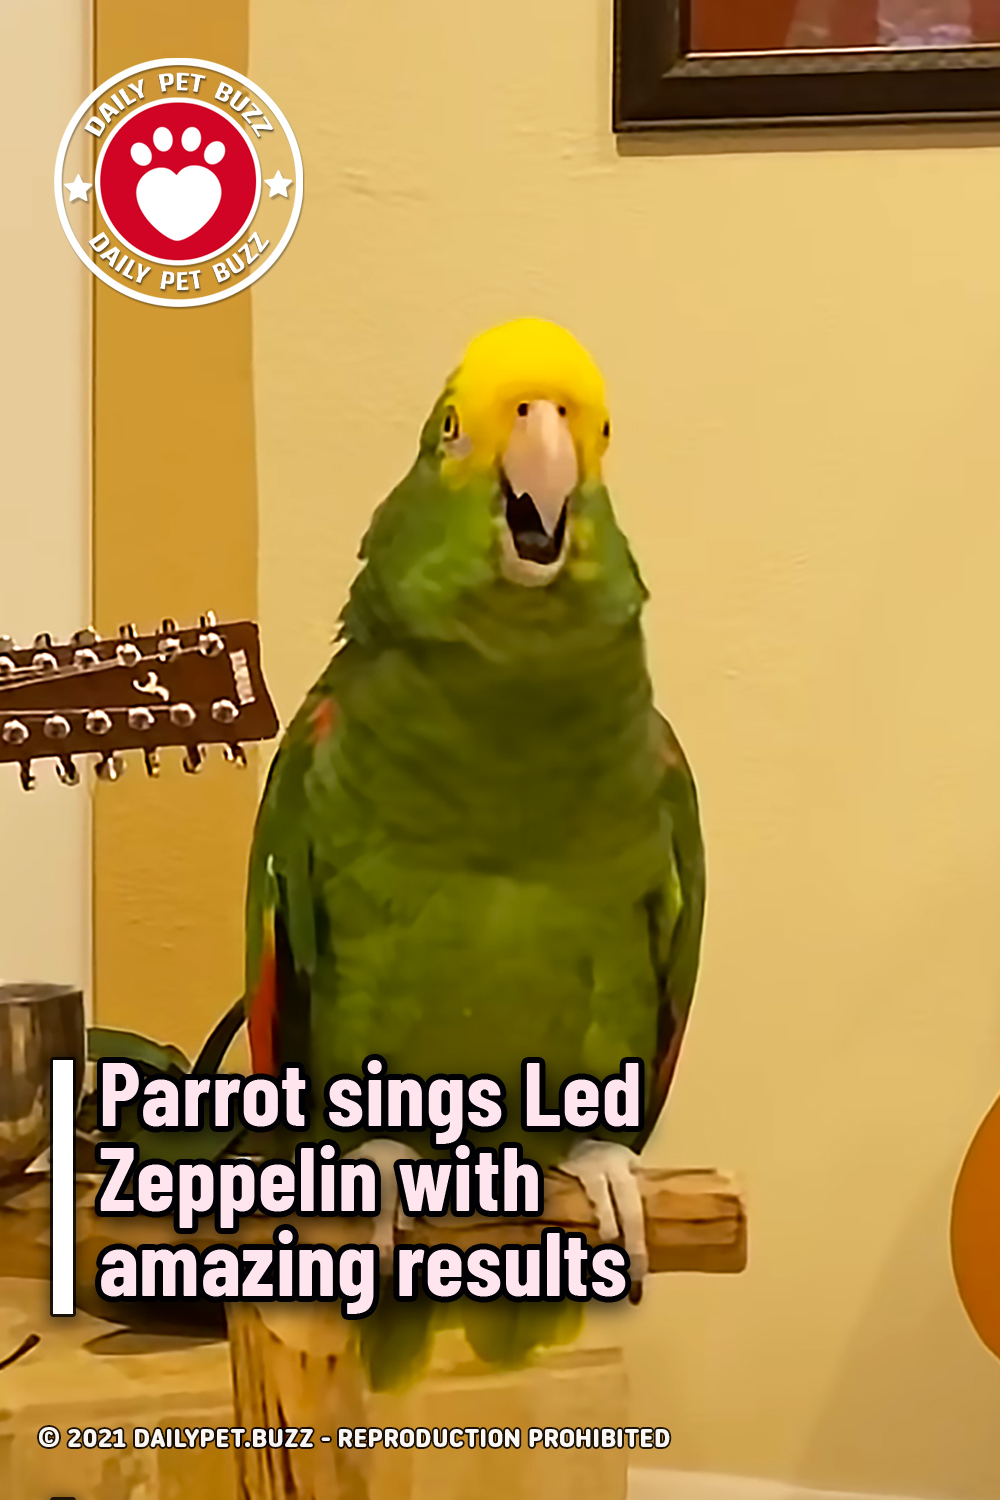 Parrot sings Led Zeppelin with amazing results